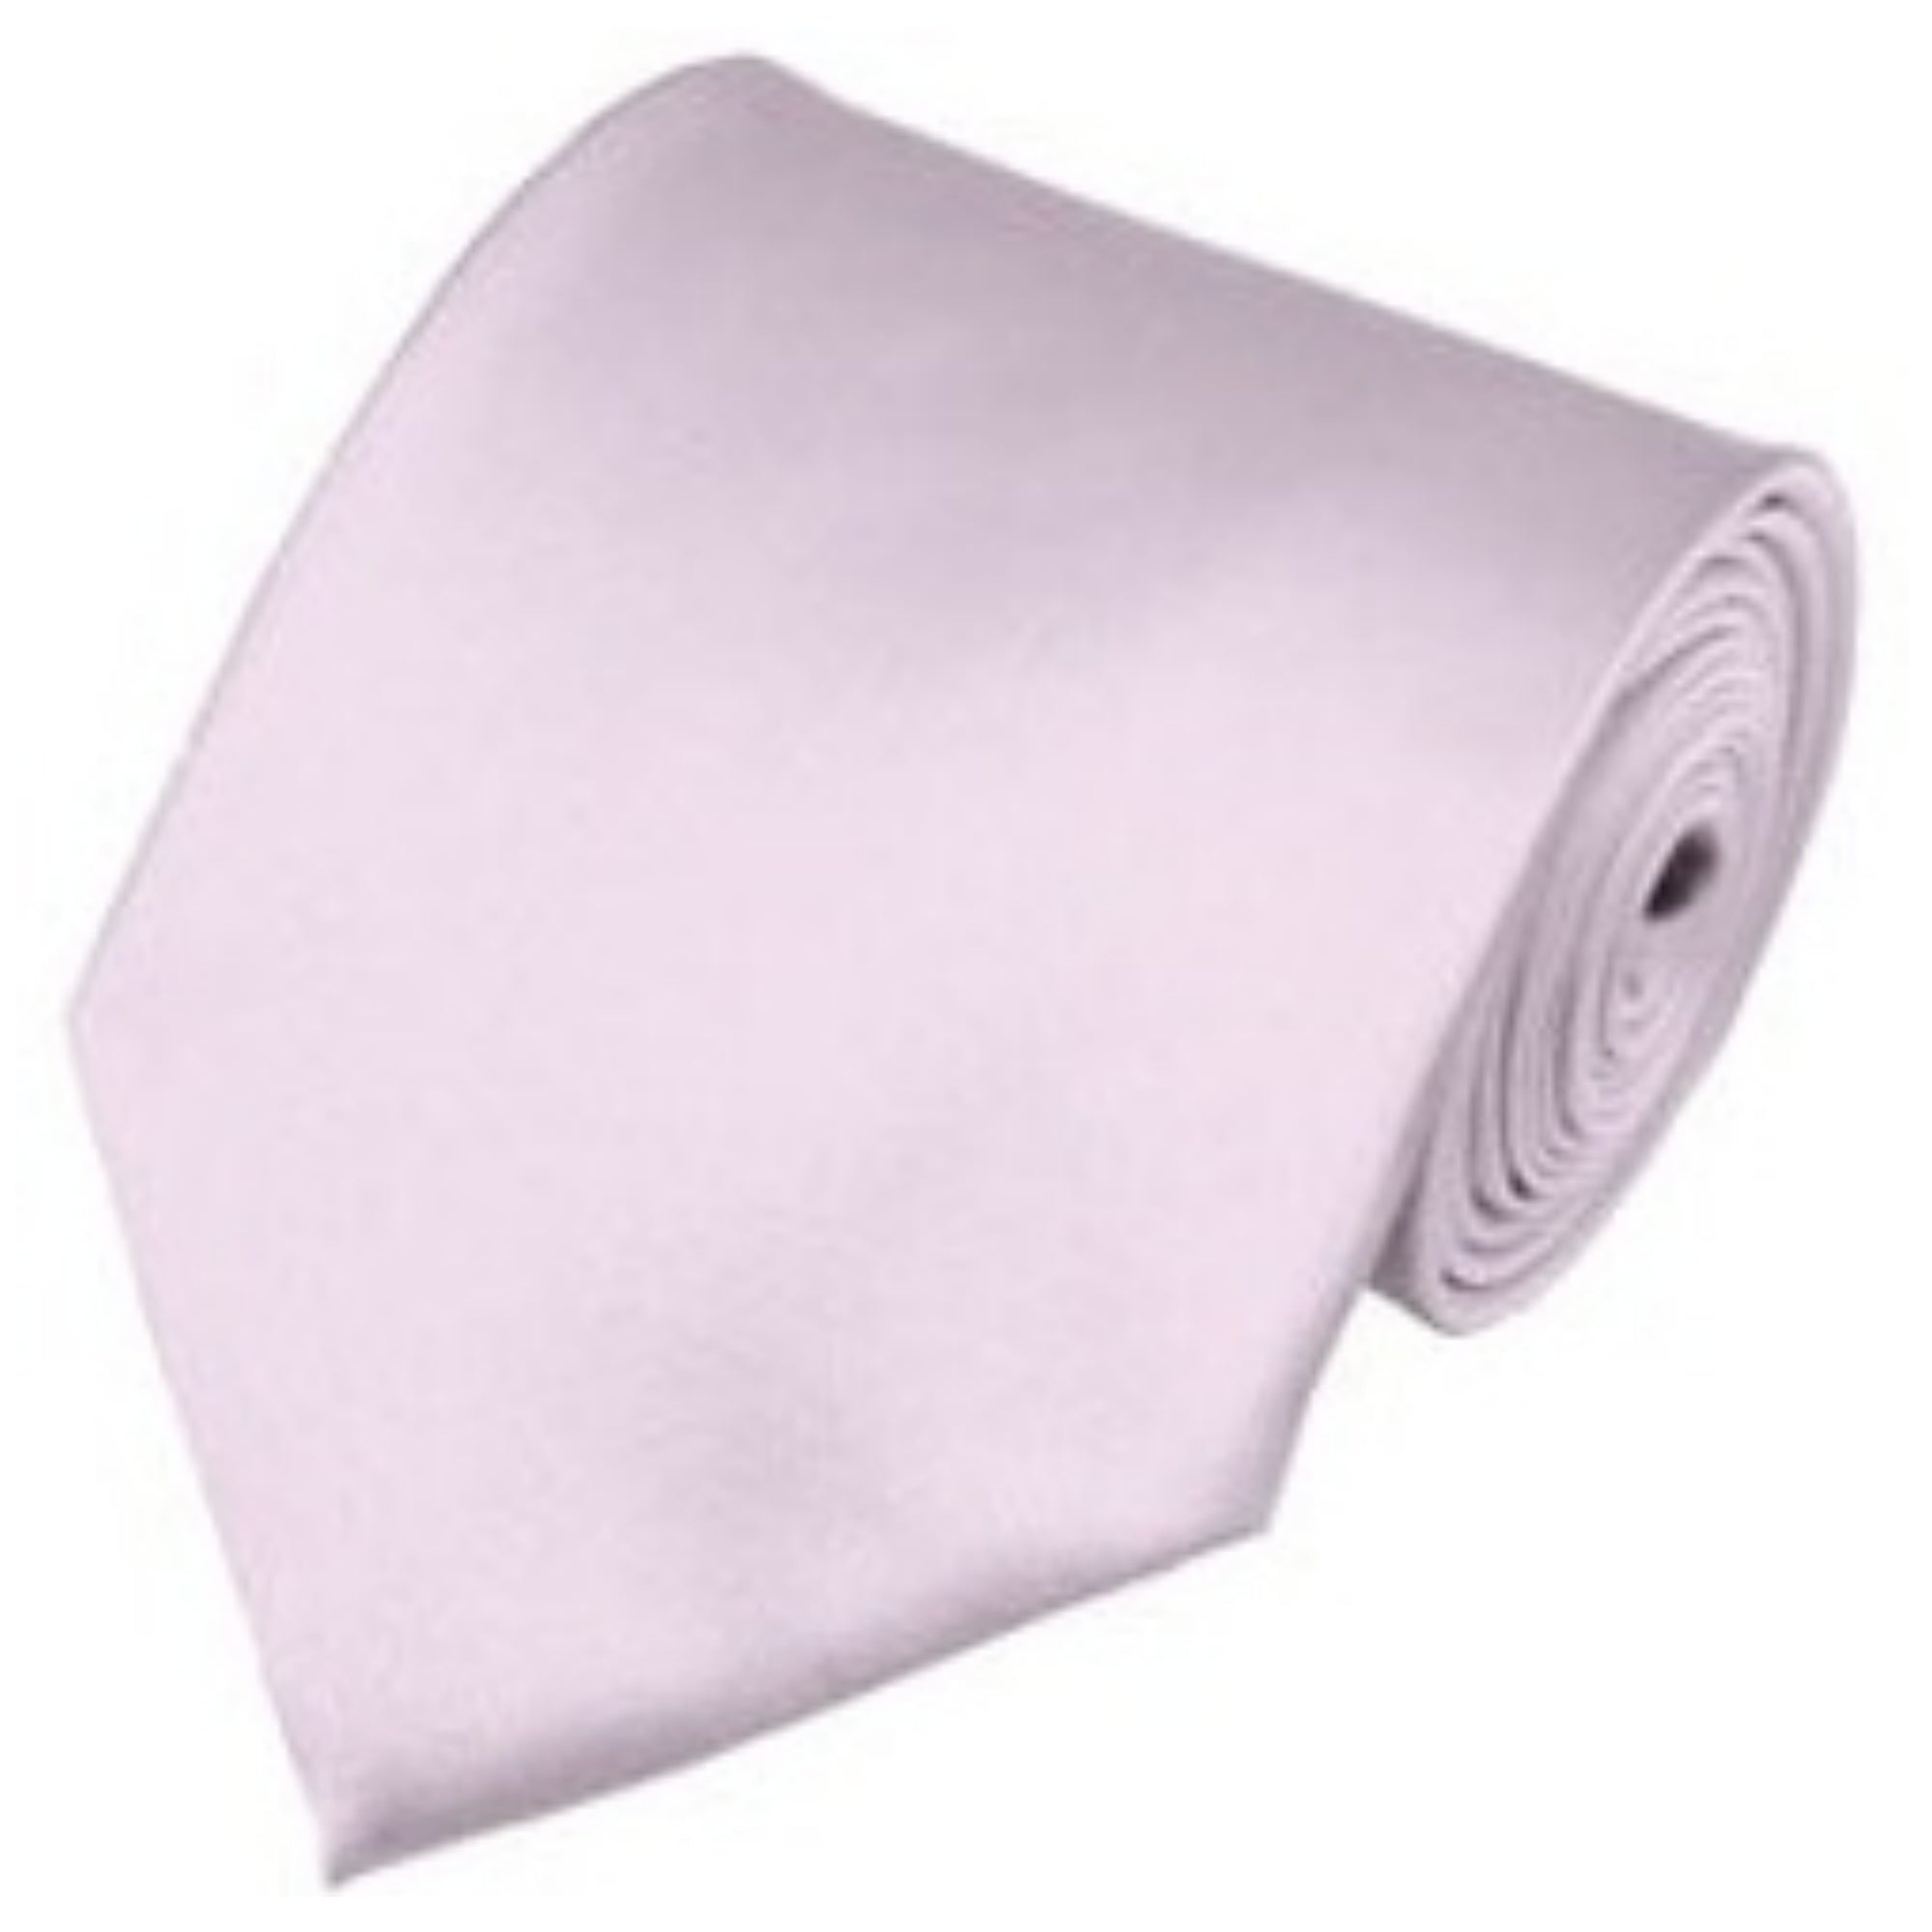 TheDapperTie Solid Color 3.5 Inch Wide And 62 Inch Extra Long Necktie For Big & Tall Men Neck Tie TheDapperTie Light Pink  